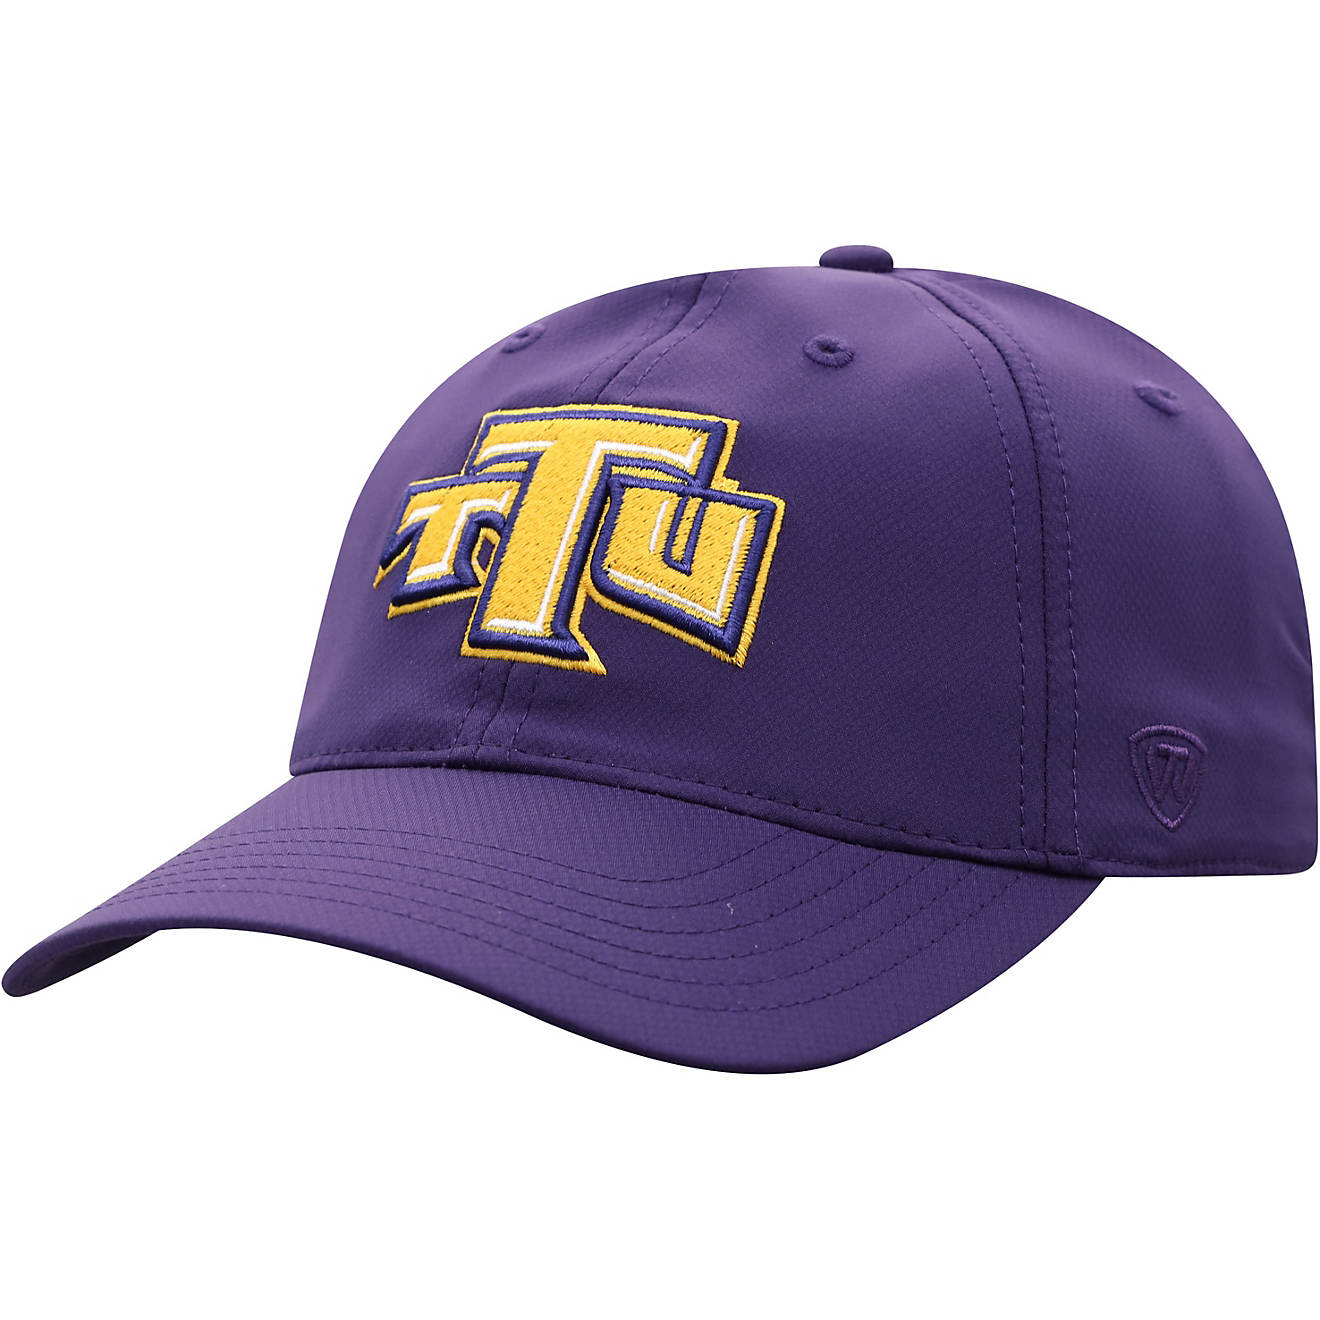 Top of the World Adults' Tennessee Tech University Trainer 20 Adjustable Team Color Cap                                          - view number 1